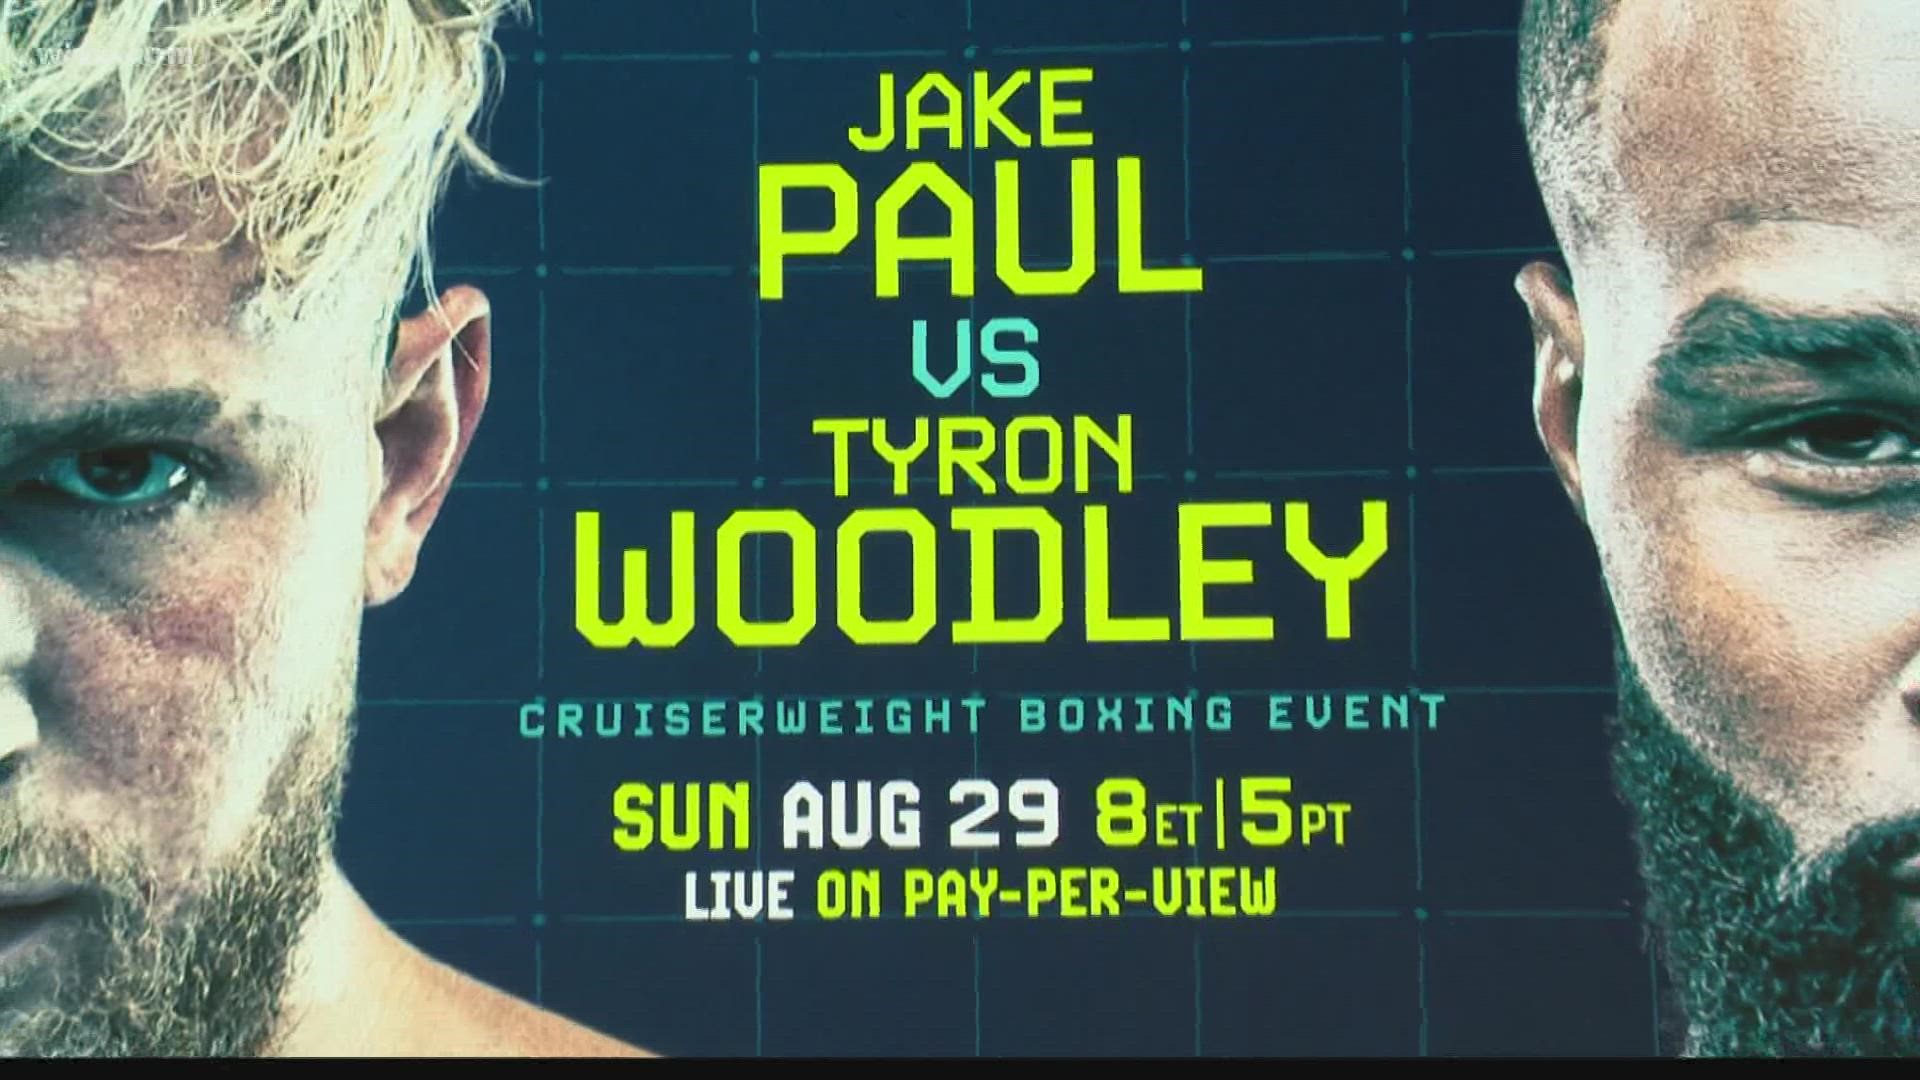 Fight Night! Boxing Match Between Jake Paul and Tyron Woodley Happens Here In Cleveland Tonight